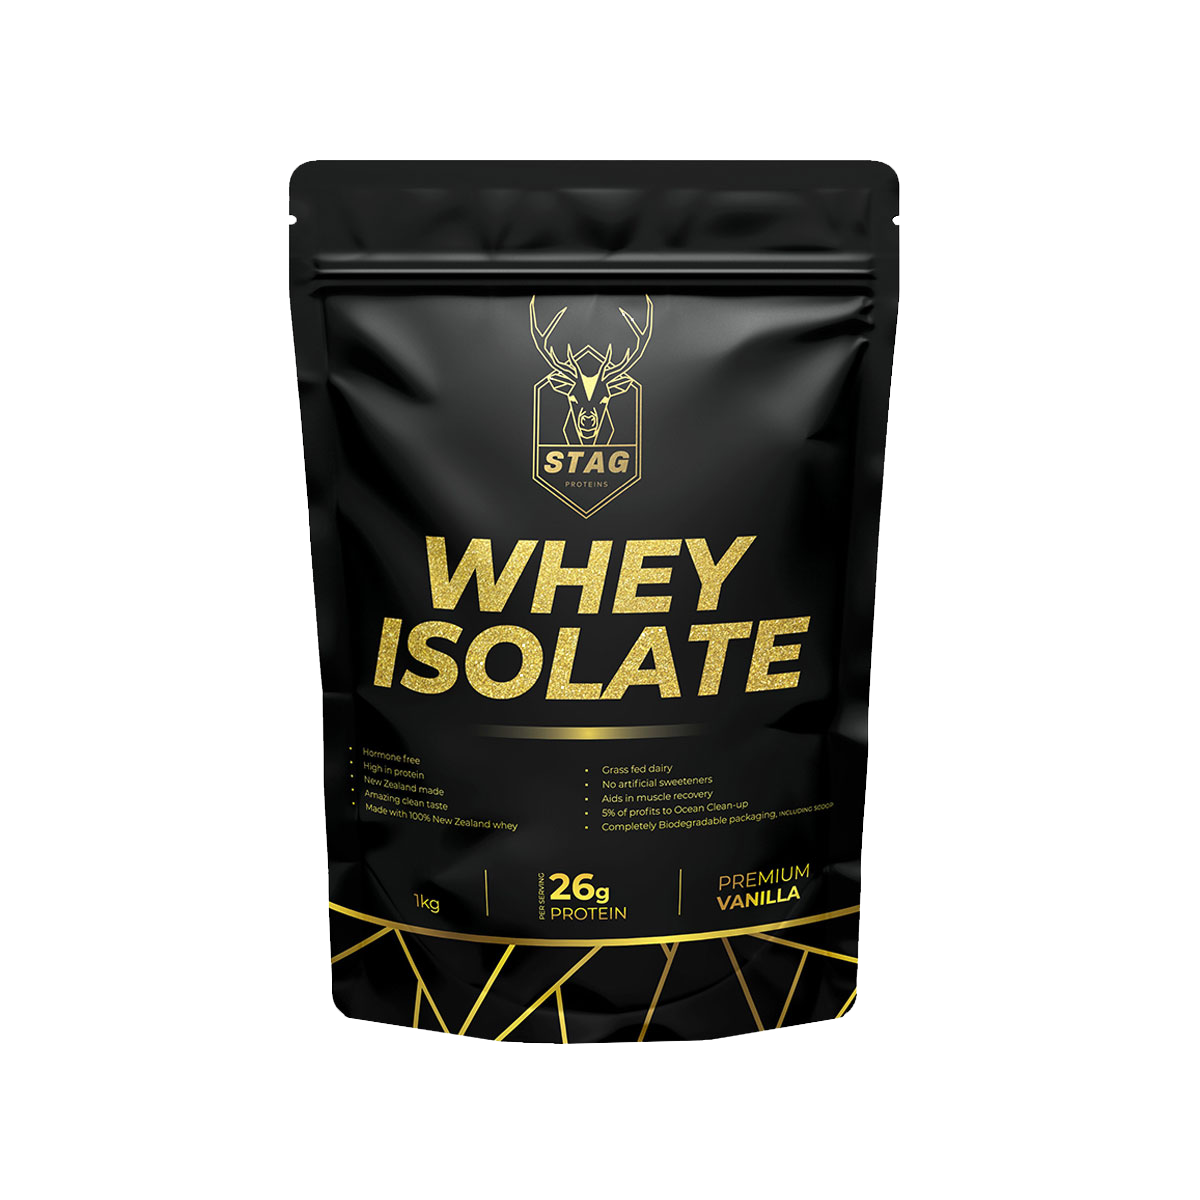 Shop now Isolate Protein Powder Online - StagProteins Store